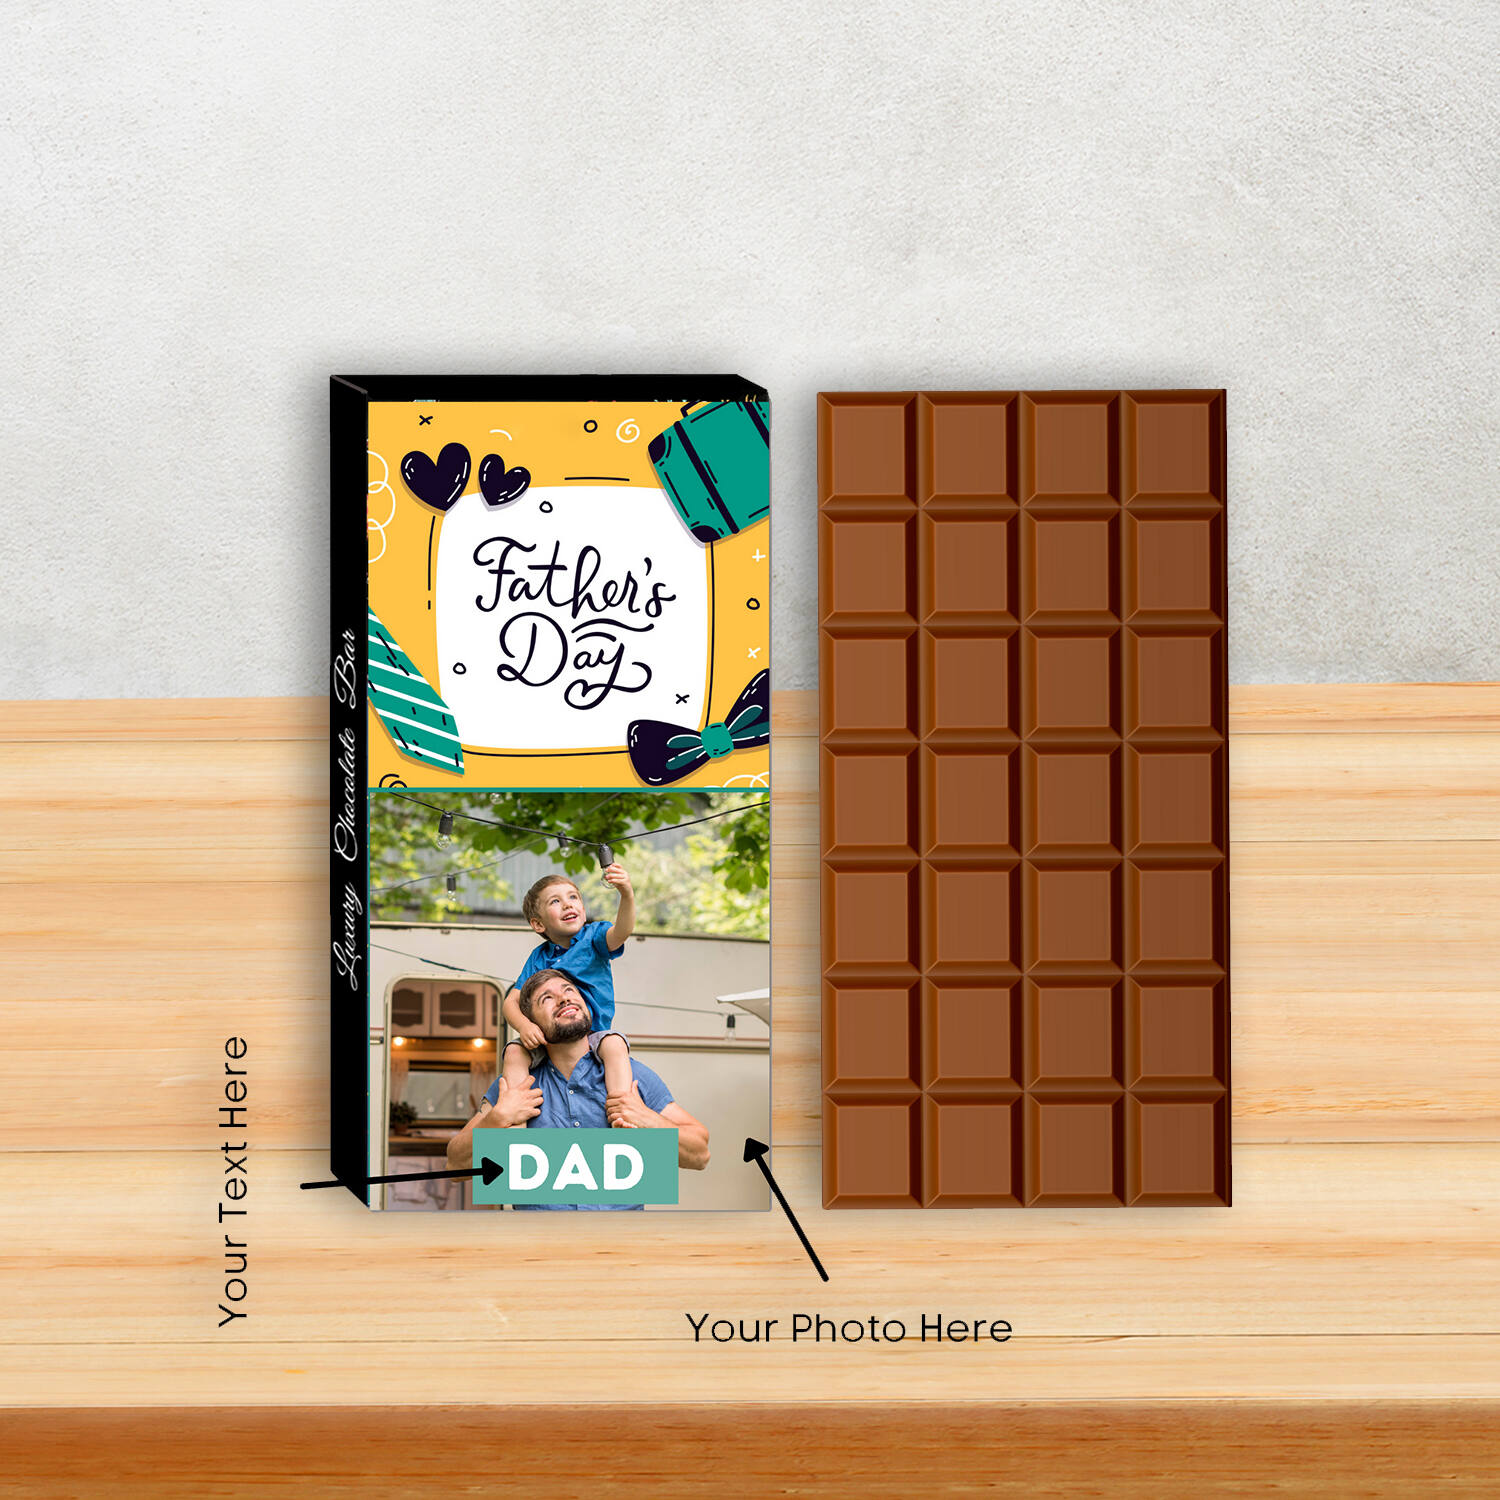 Father's Day Gift Guide 2019 - Best Gifts! - KristyWicks.com